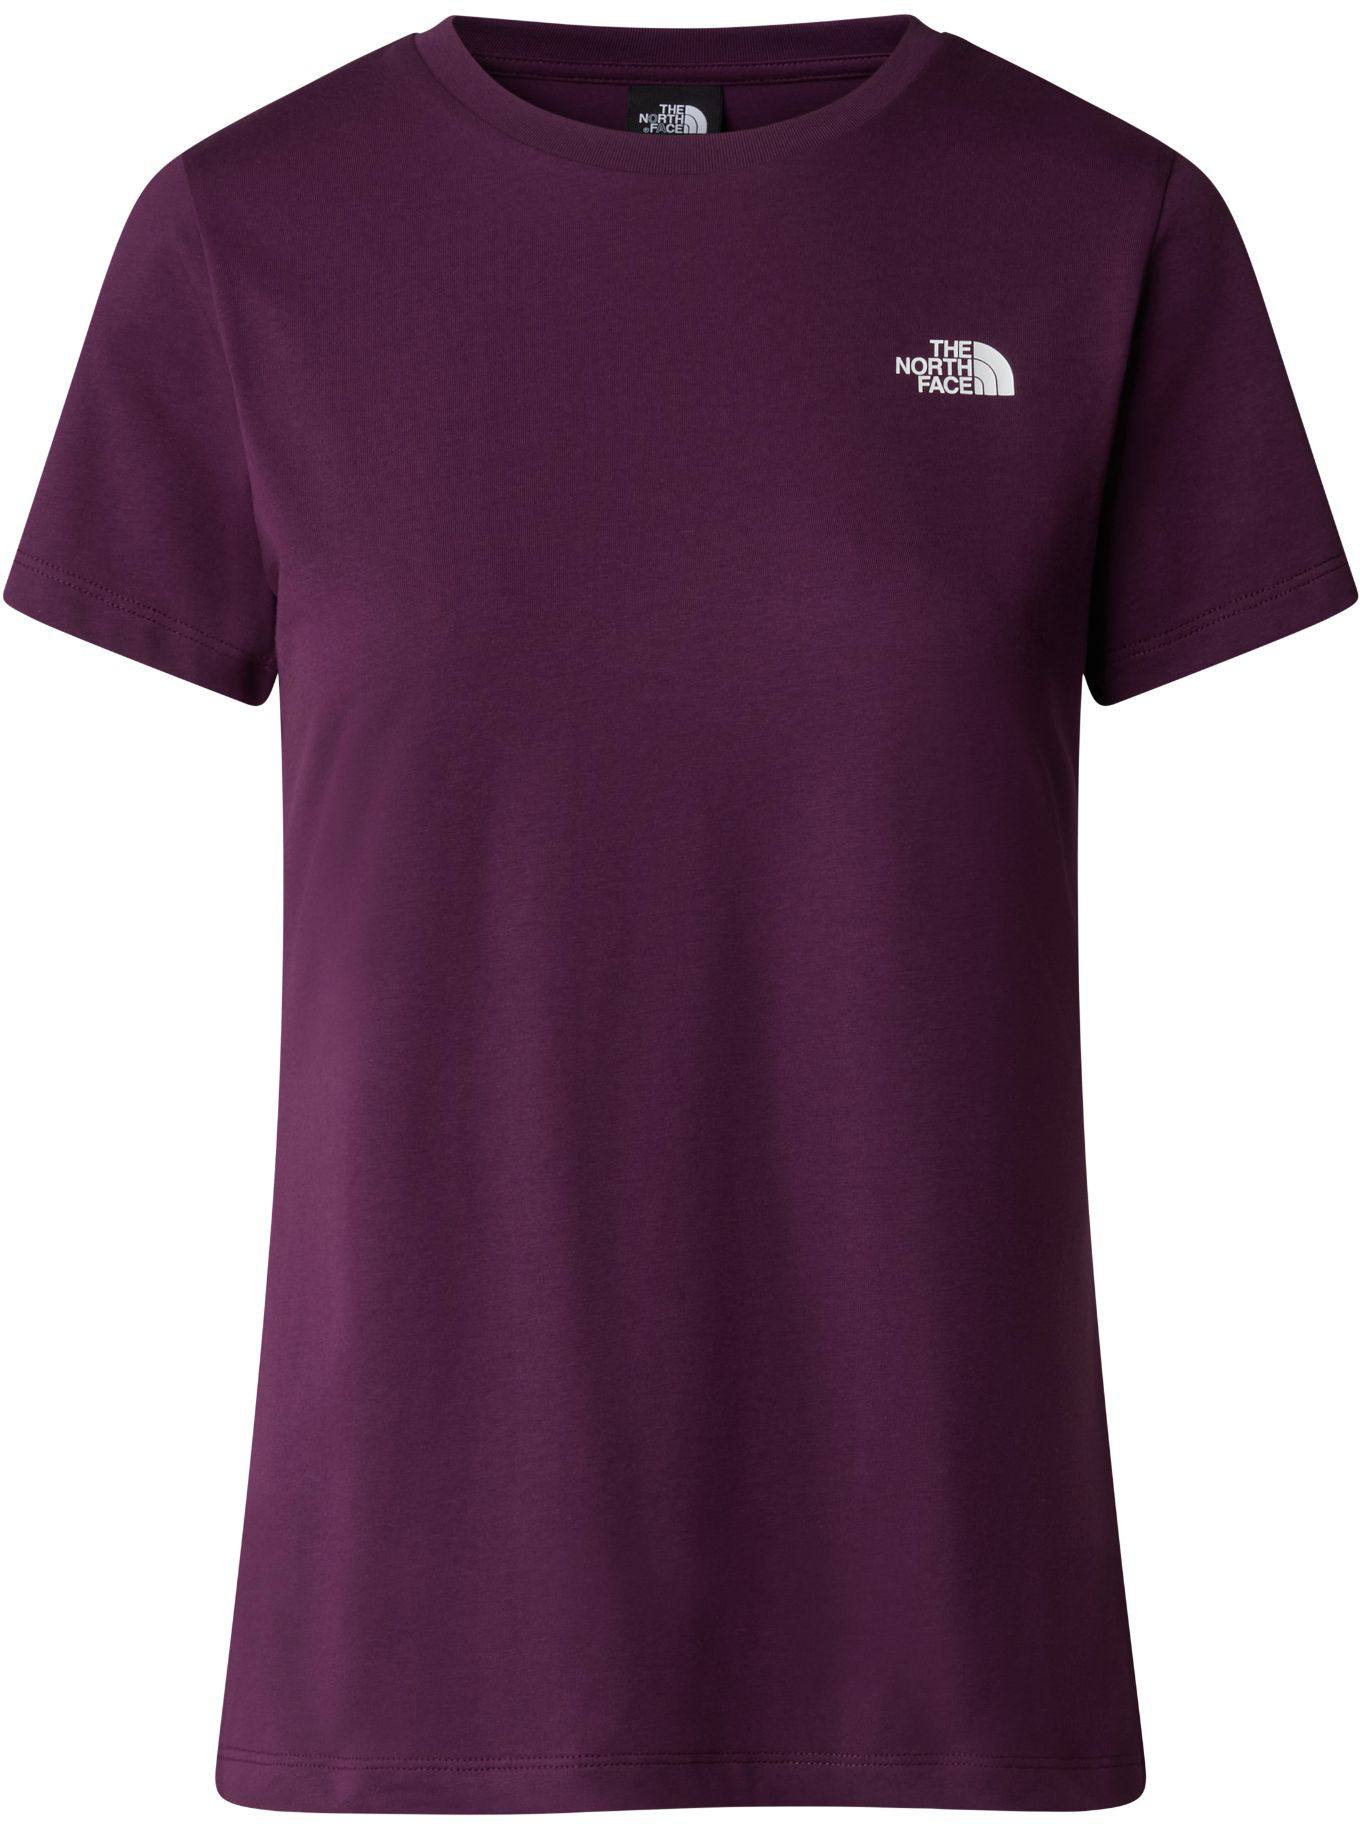 The North Face Women’s Simple Dome Tee